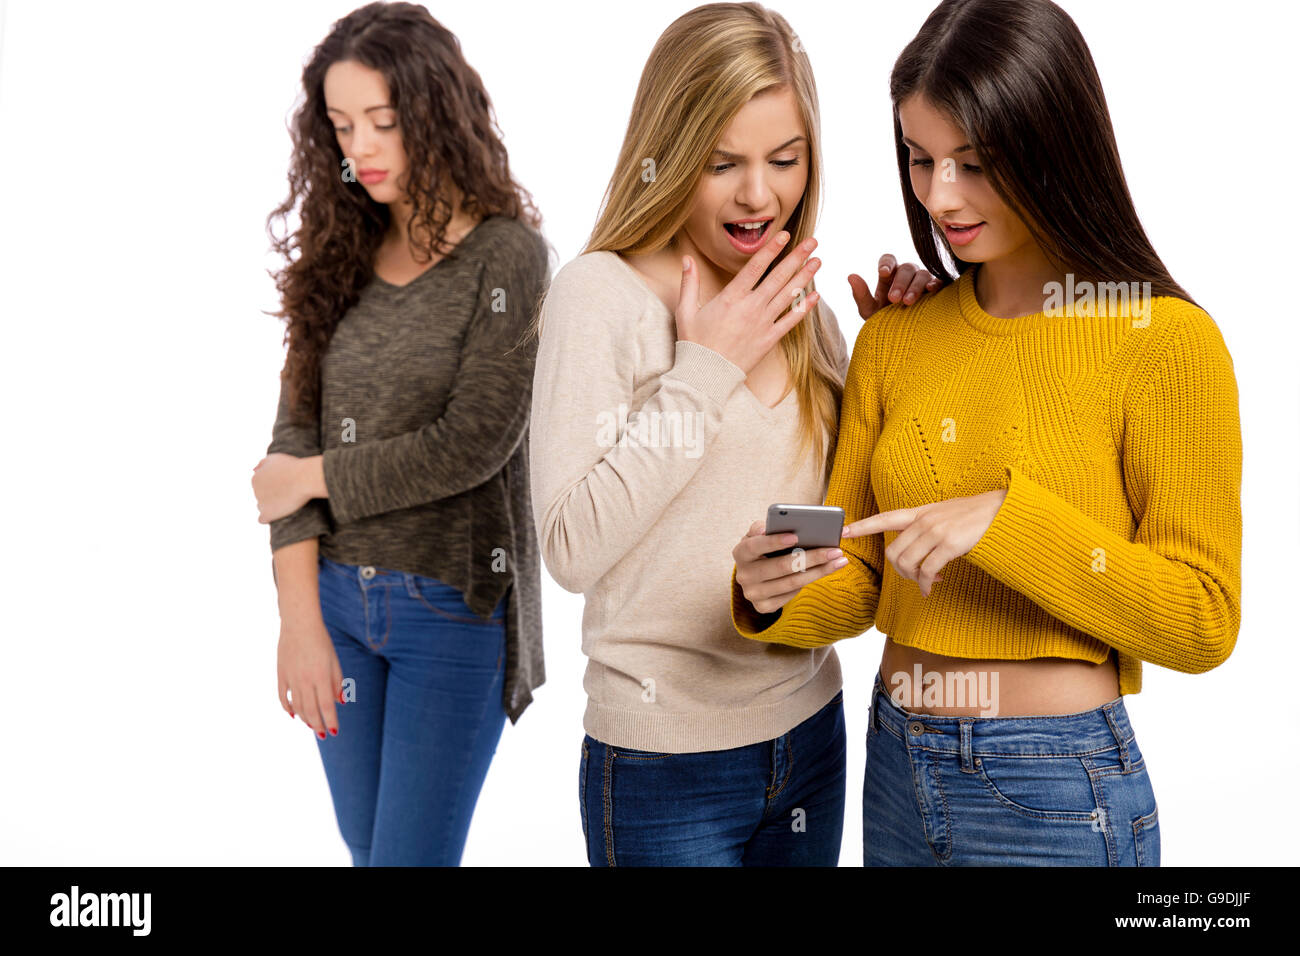 Teenagers making gossip from other girl Stock Photo